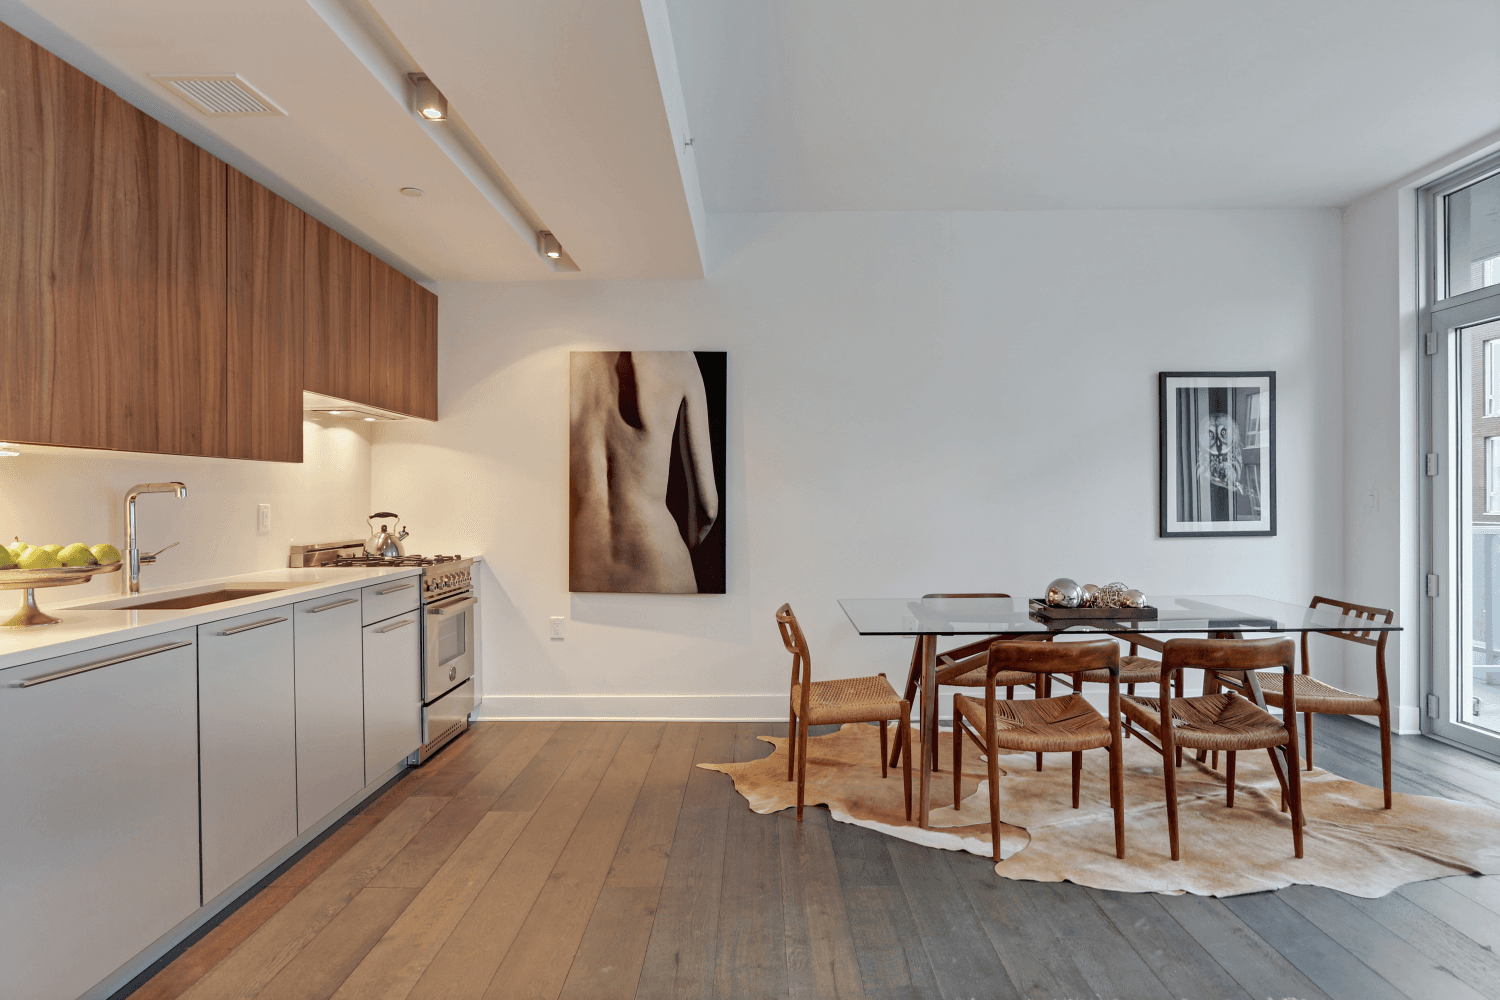 Welcome home to Residence 4B, a lofty one bed one bath located in TWO12 North 9th Street, an exquisite residential gem nestled in the heart of Williamsburg's vibrant Northside.